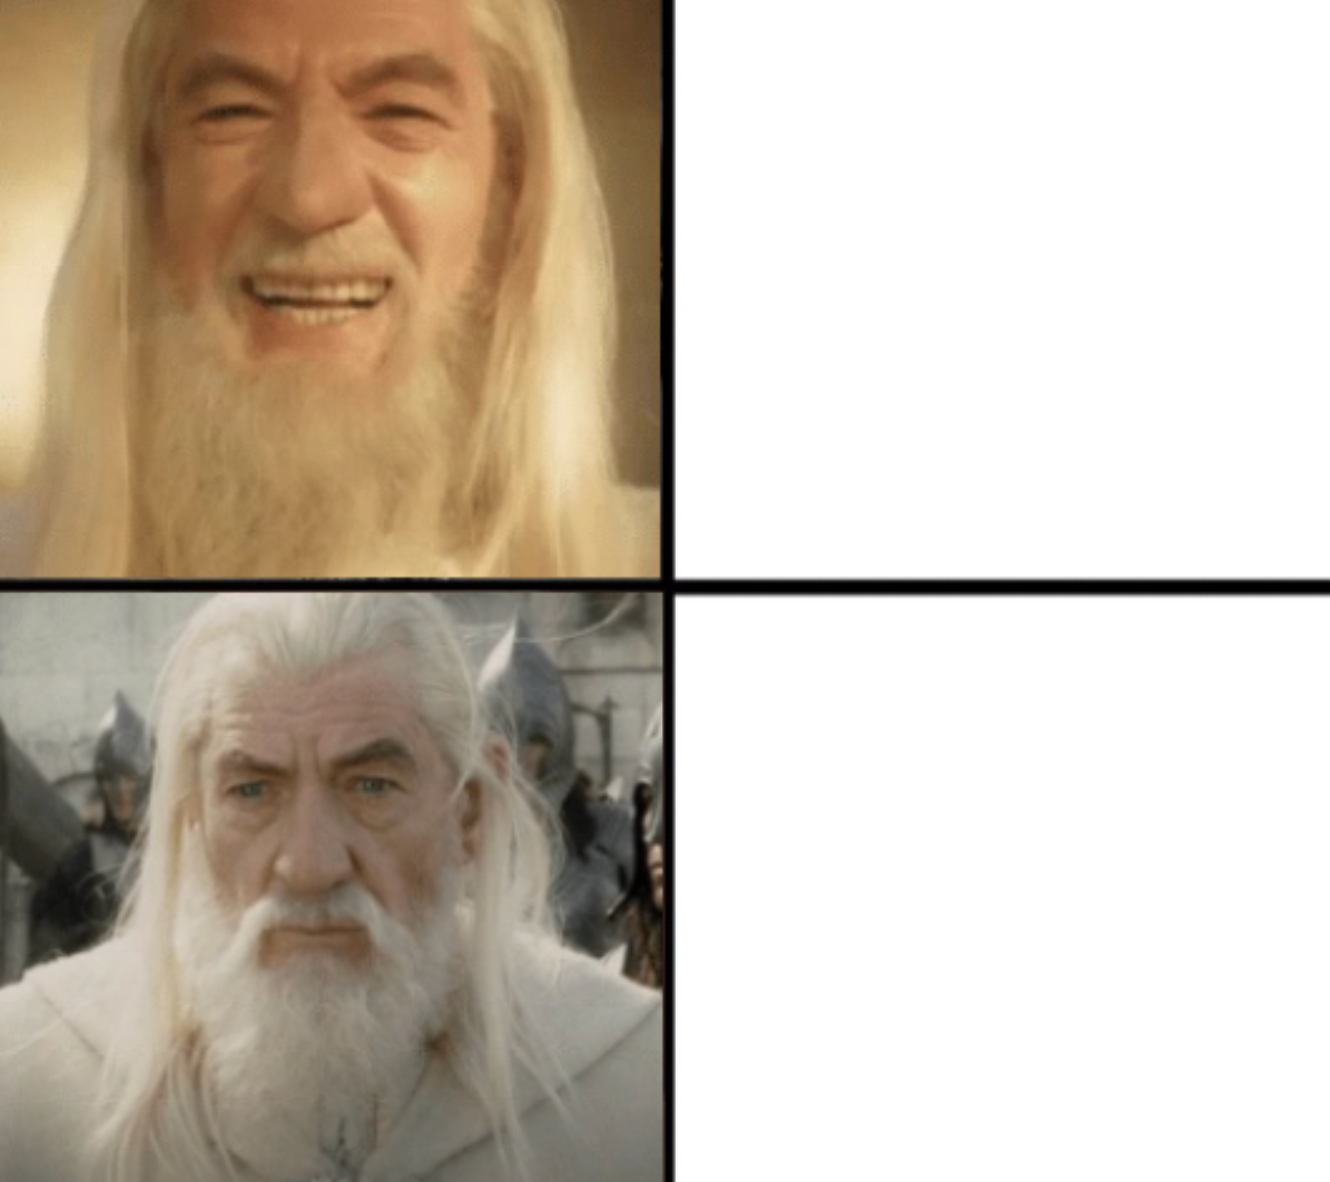 High Quality Featured Drake Gandalf Memes other way around Blank Meme Template